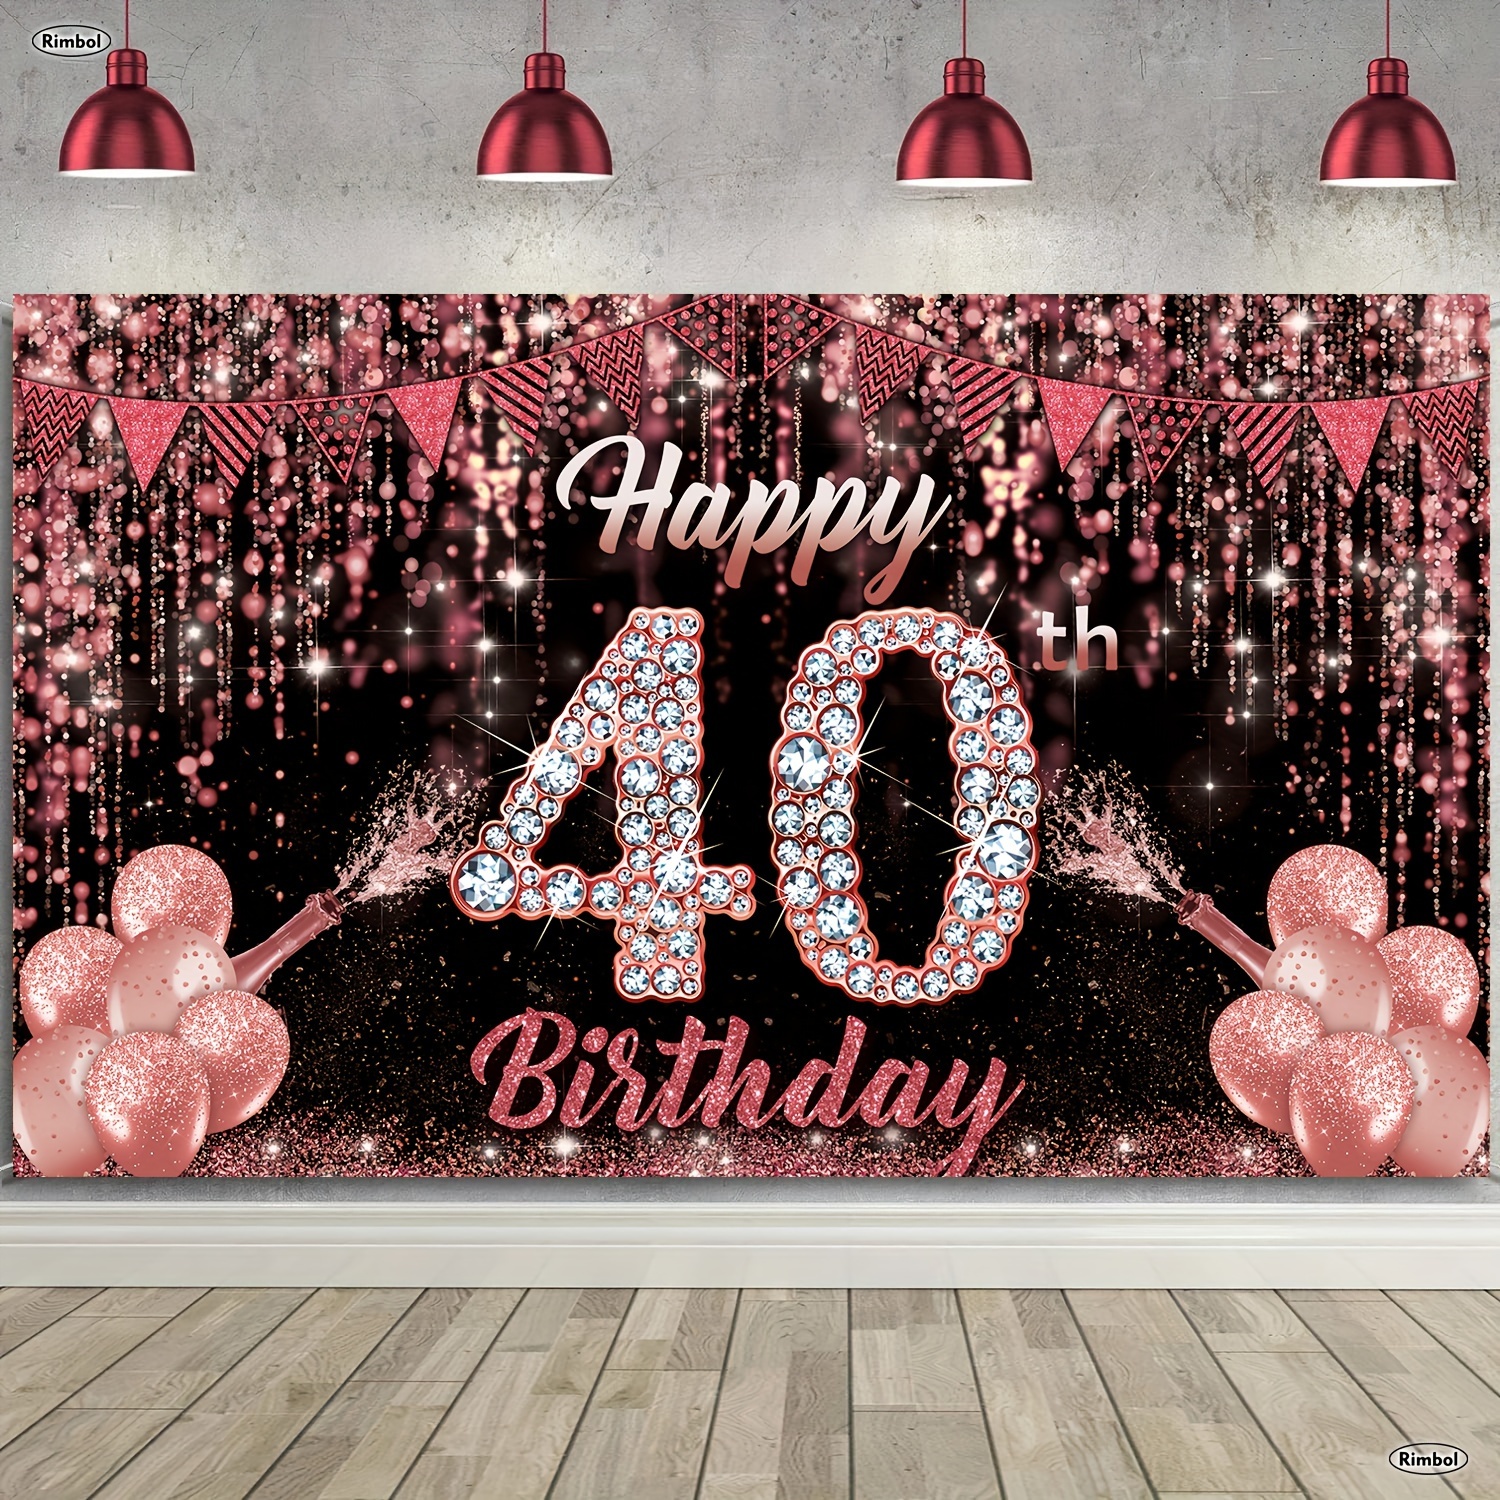 

Chic Rose Red 40th Birthday Banner - Polyester, All-season Party Decor For Women, Includes Pink Photo Booth Backdrop & Supplies